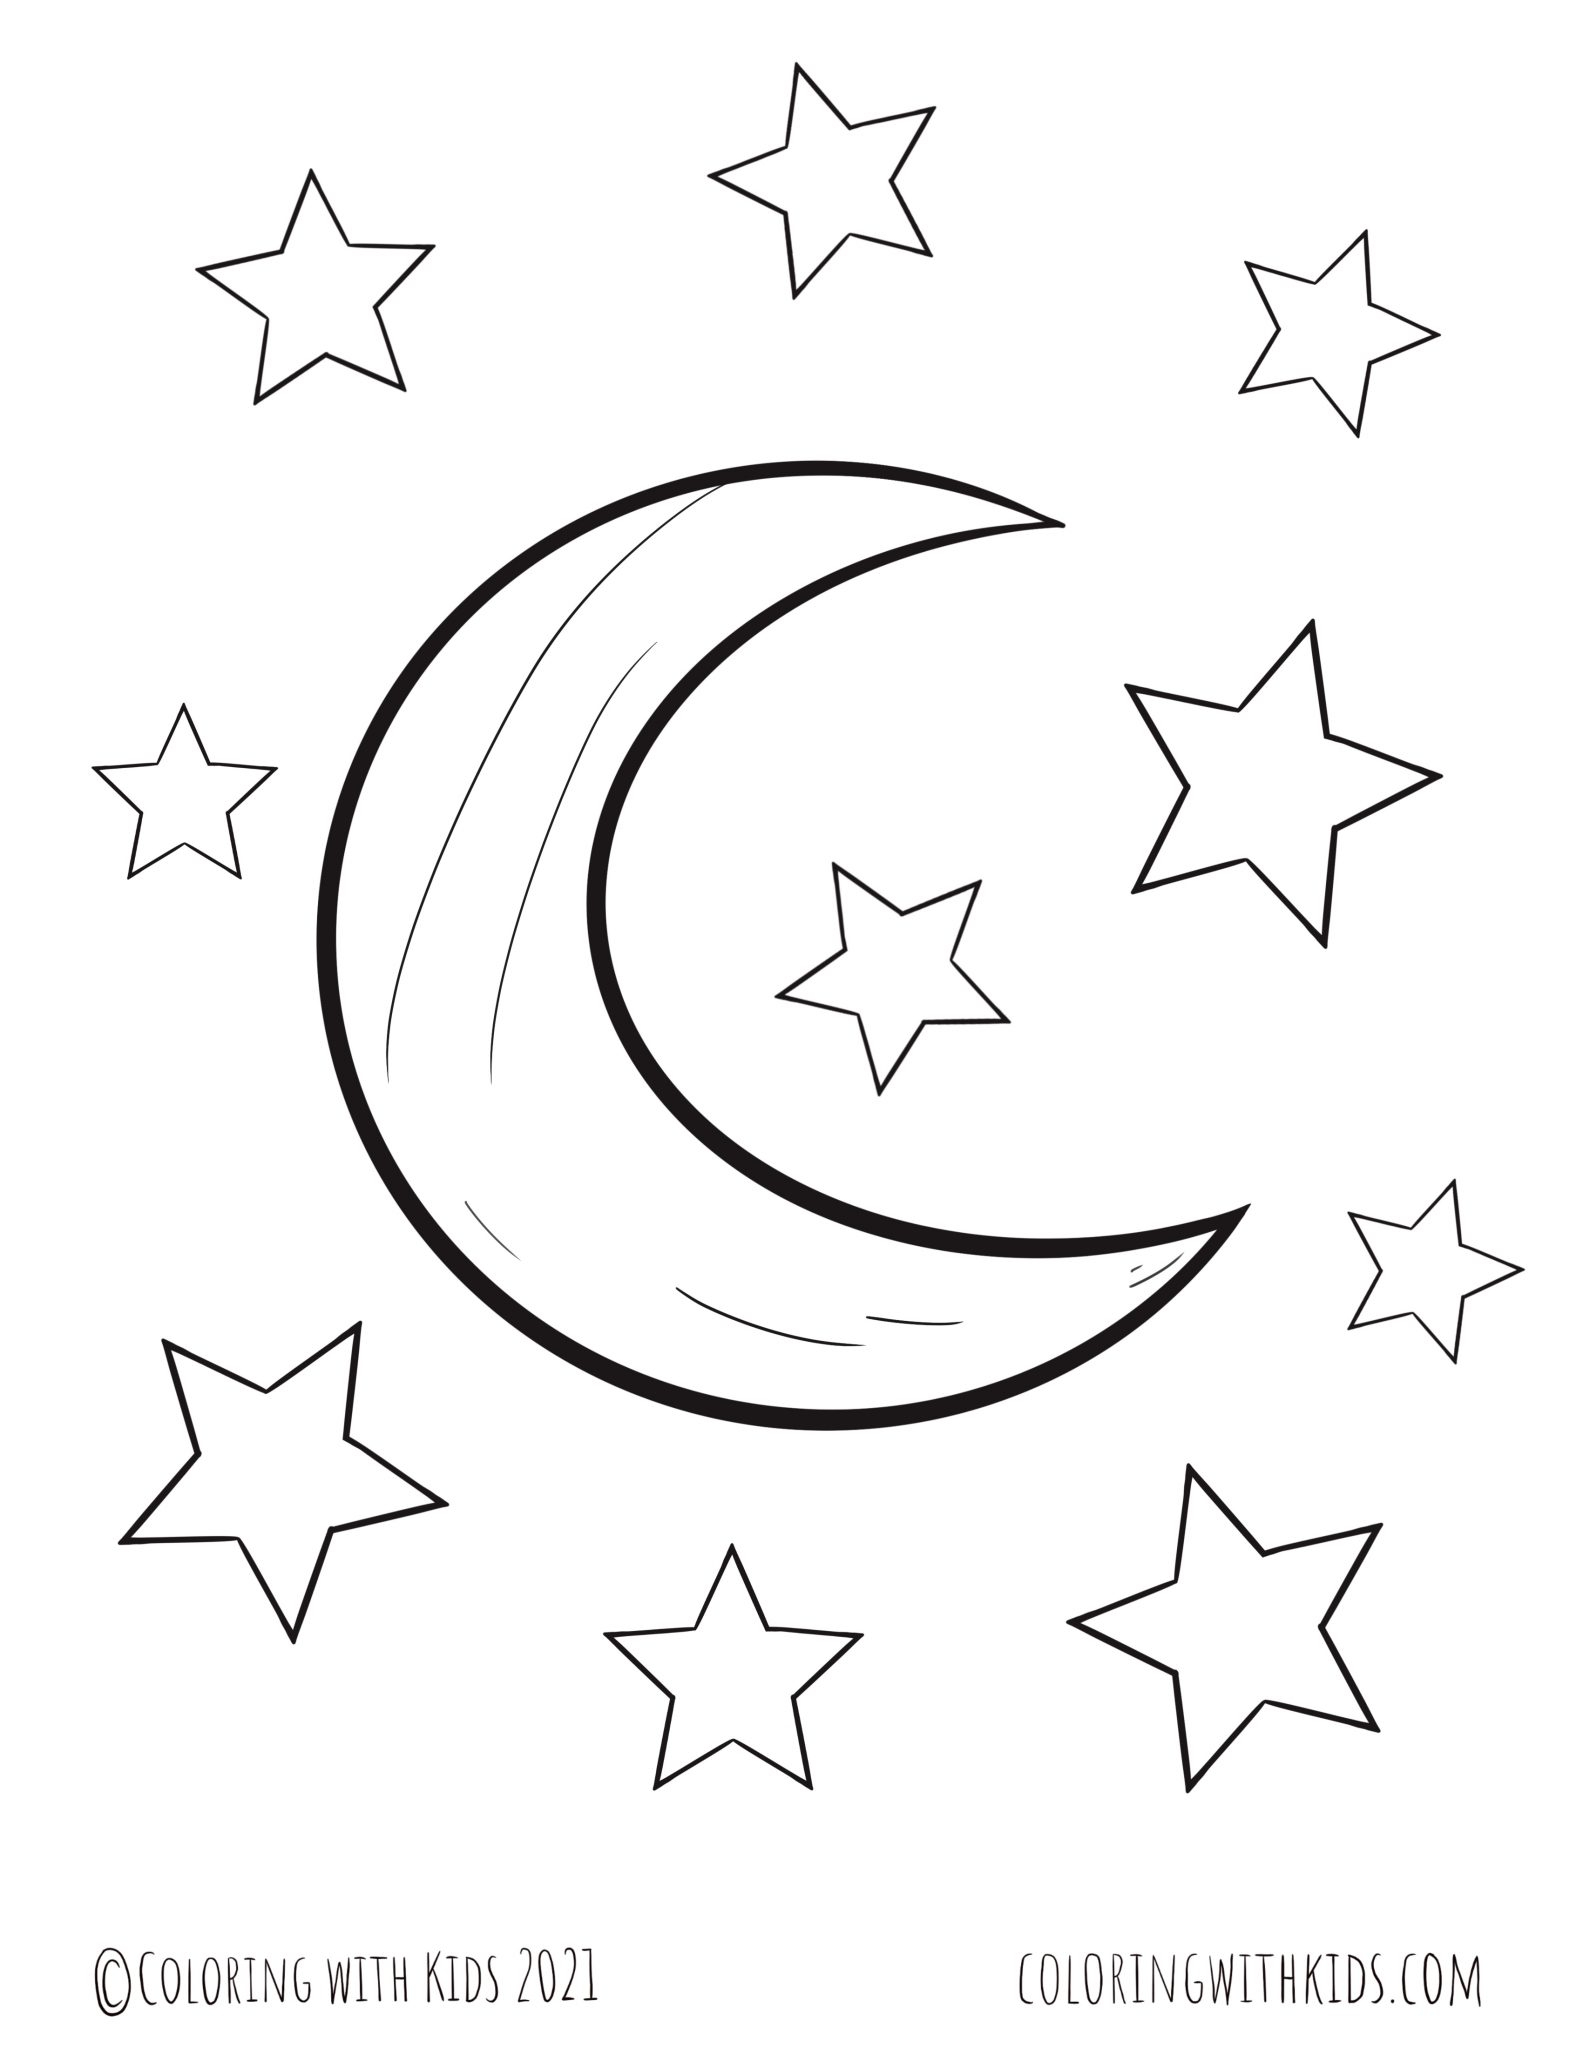 Twinkle Twinkle Little Star Coloring With Kids - FreePrintable.me